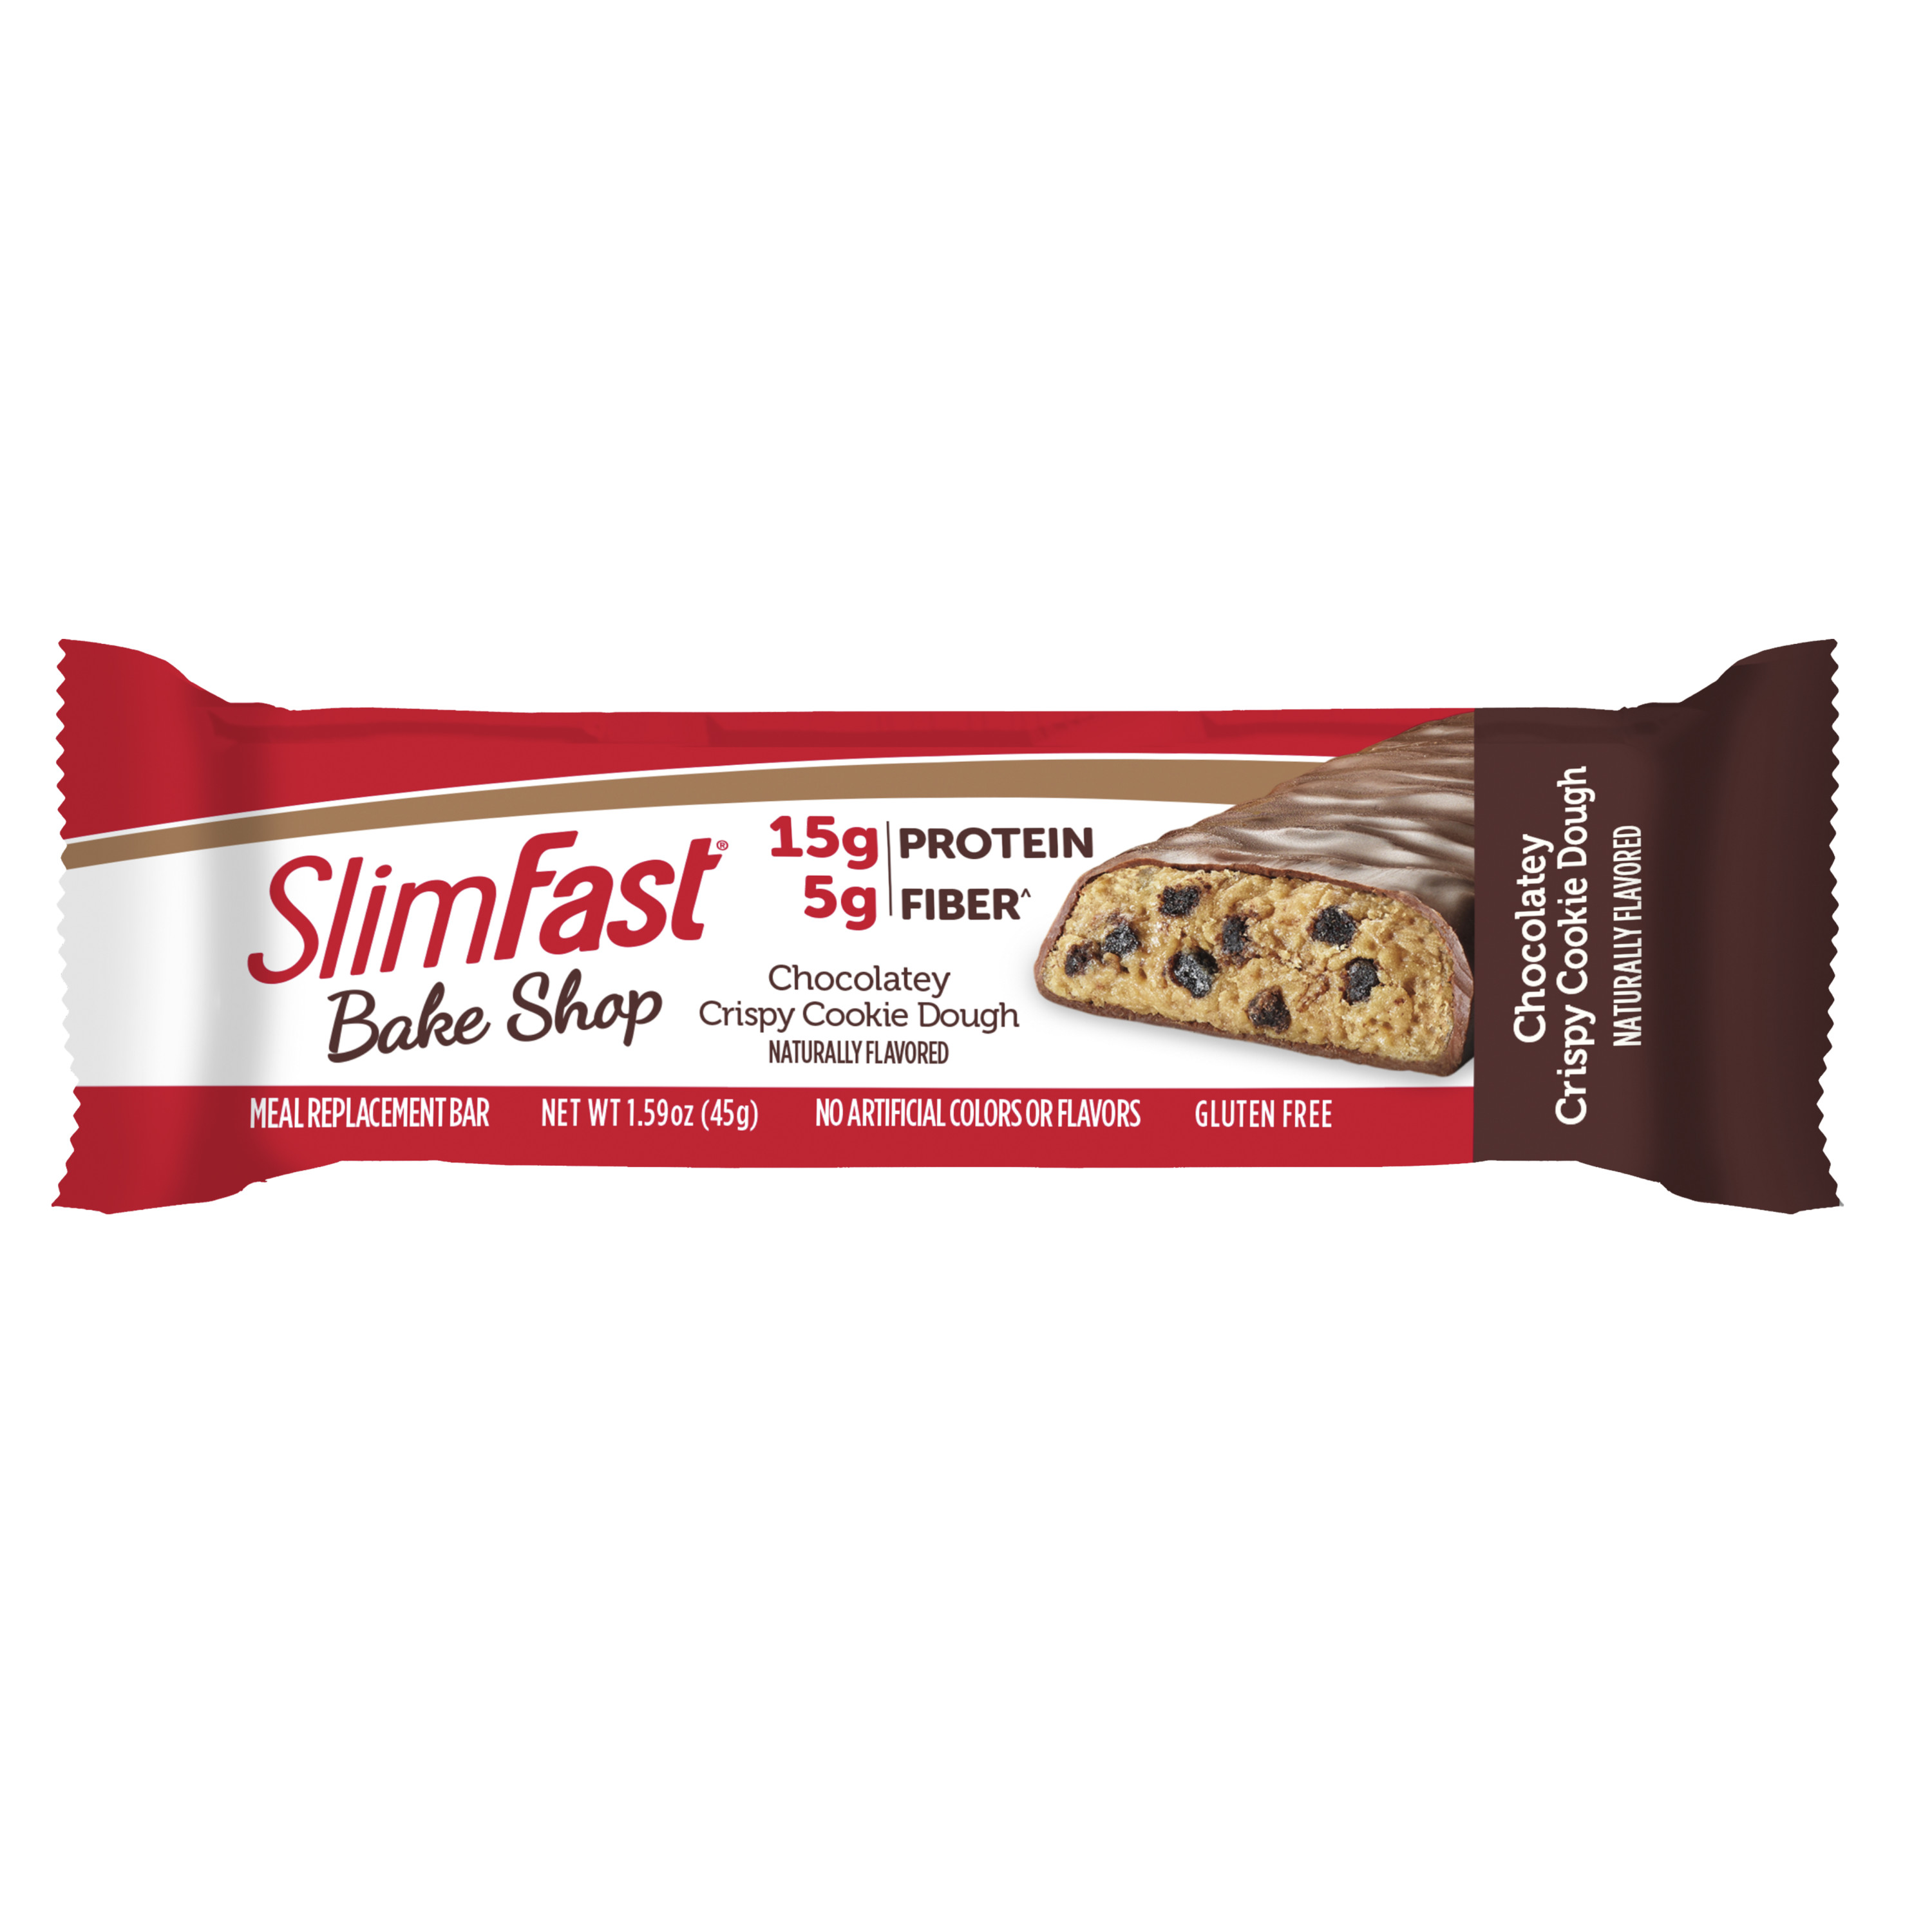 SlimFast Bake Shop Chocolatey Crispy Cookie Dough Meal Replacement Bar, 1.59 Oz, 5 Count - image 2 of 6